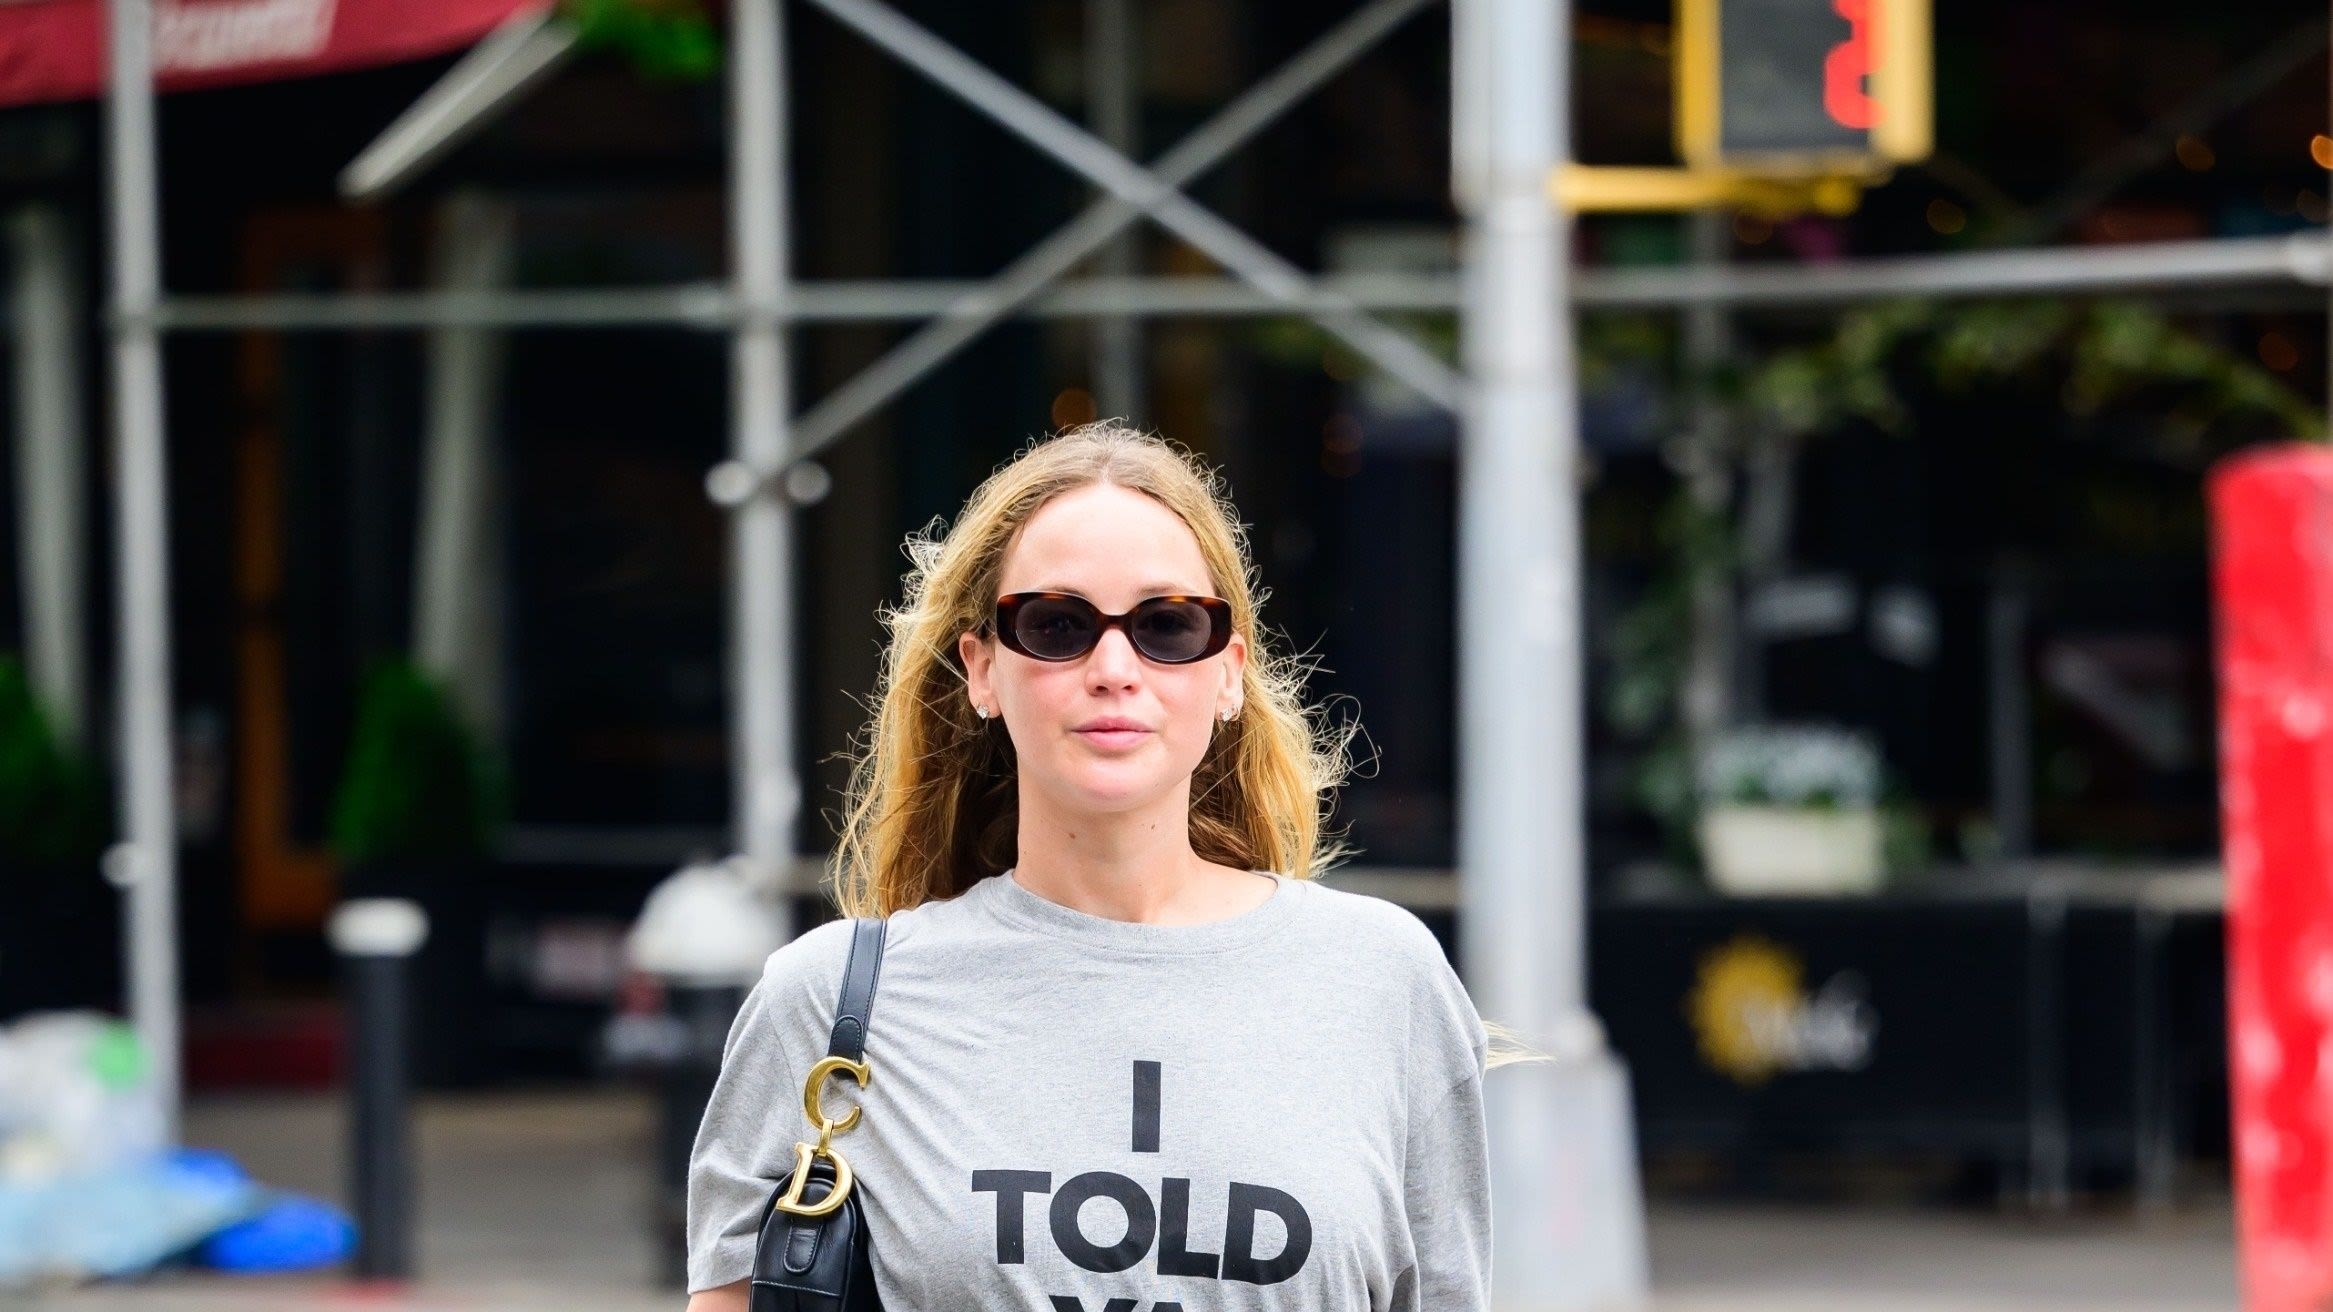 Jennifer Lawrence Is the Latest Celebrity to Wear the Famous “Challengers” Tee